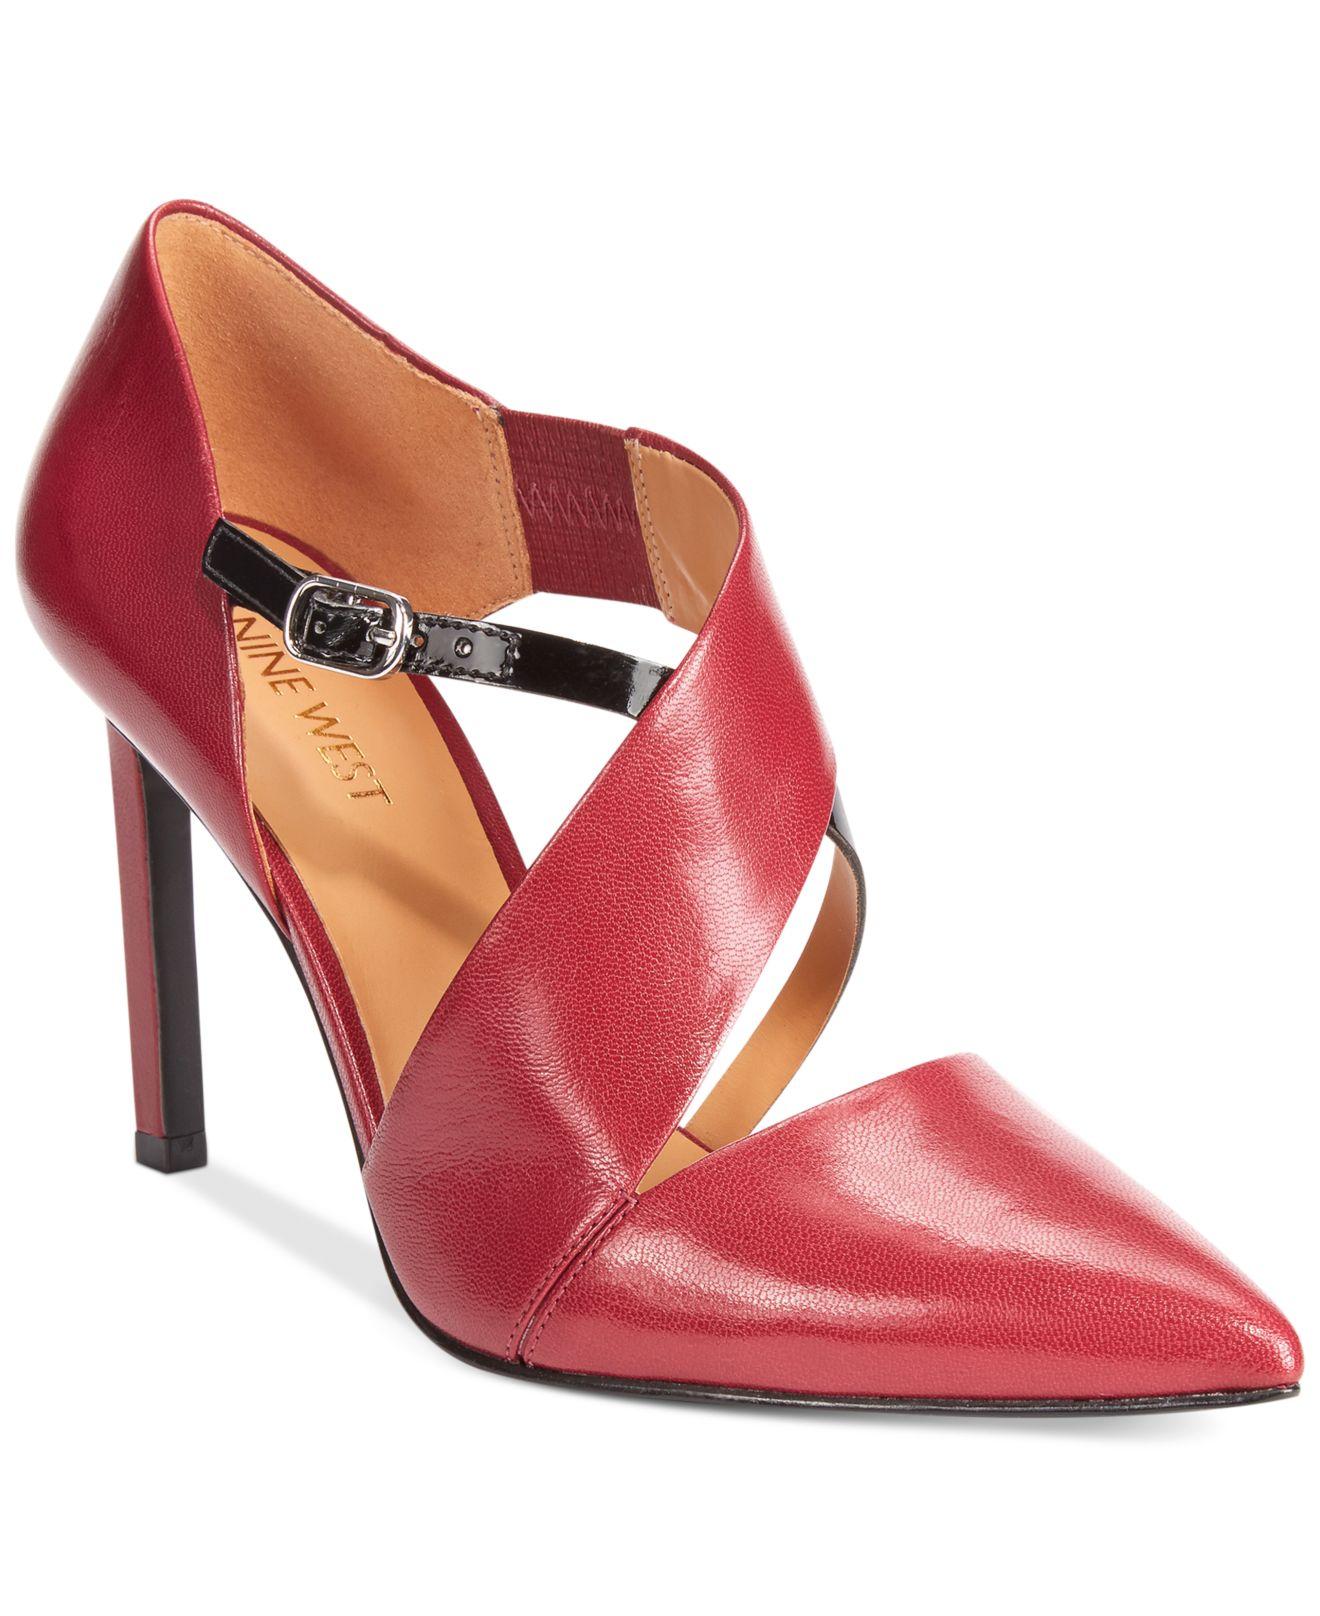 Lyst - Nine west Chillice Pumps in Red